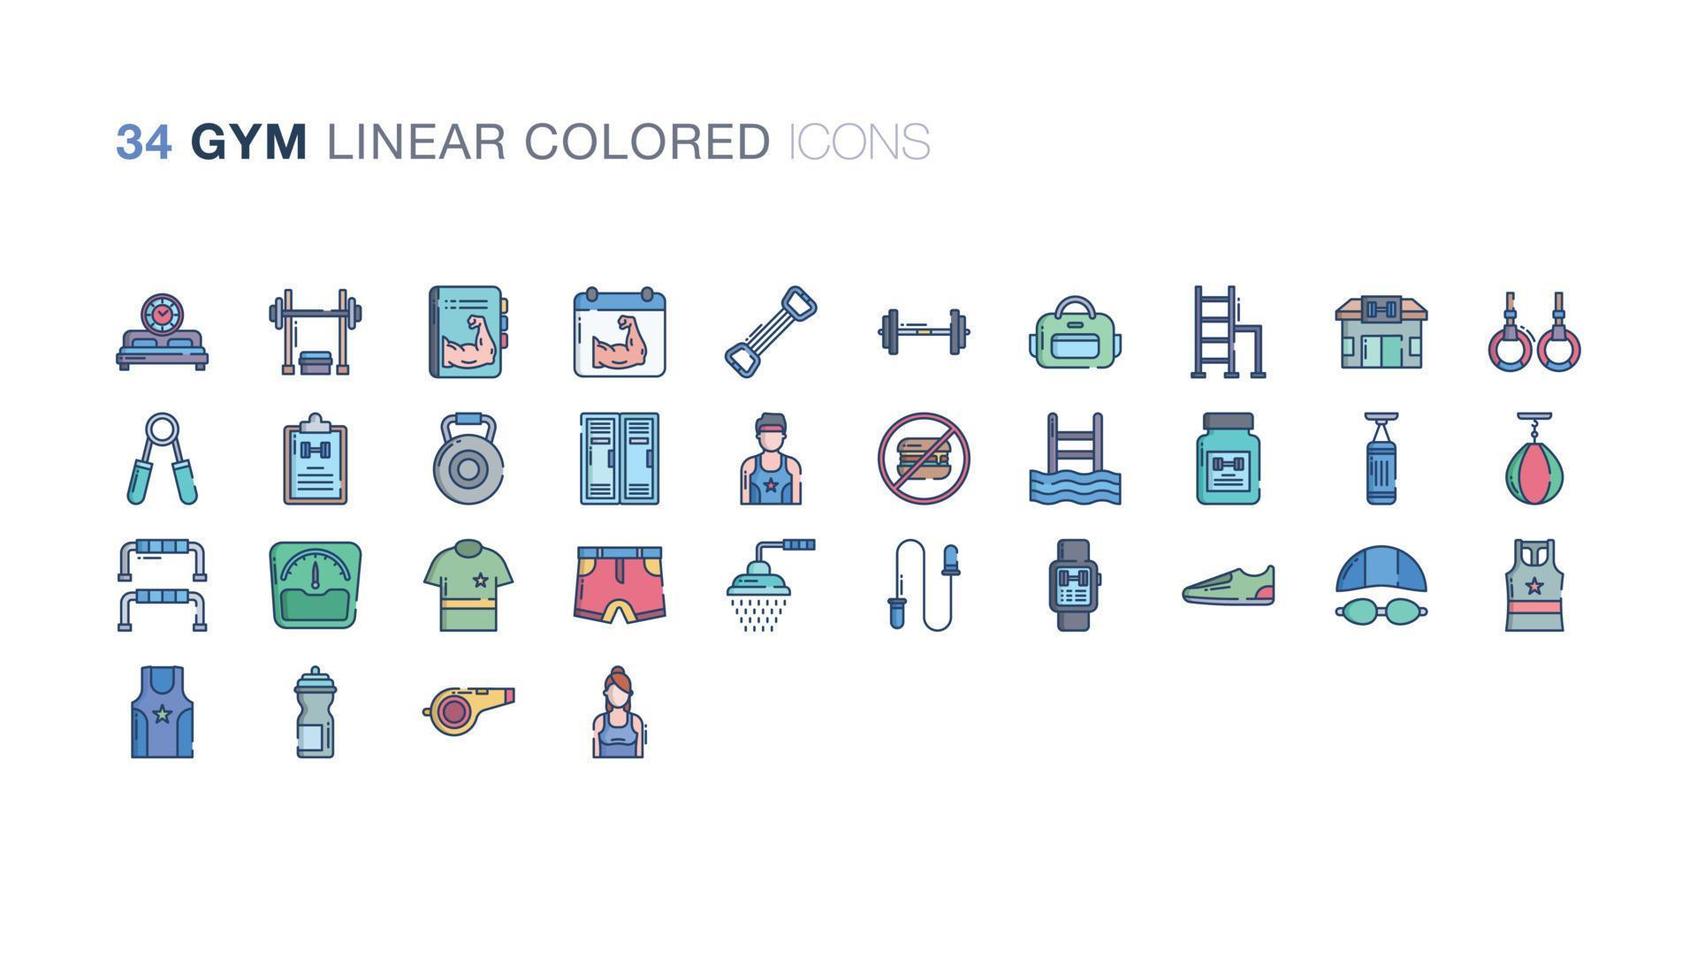 Bags and Purse Linear Colored icon set vector